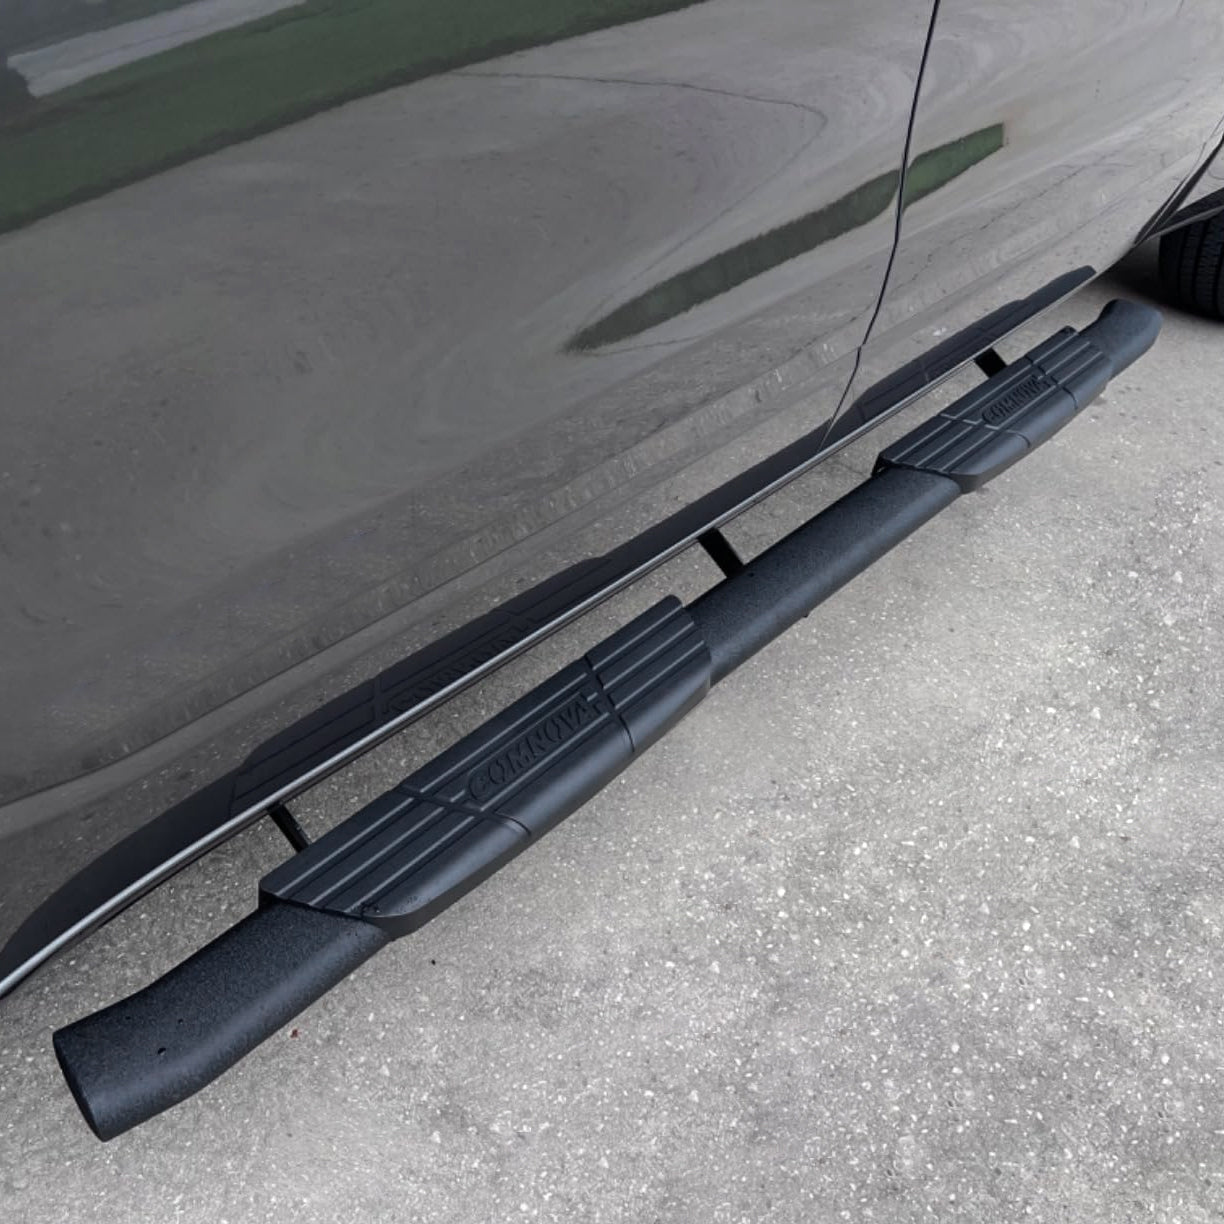 COMNOVA 4.3" Running Boards Compatible with 2019-2024 Dodge Ram 1500 New Body Style Crew Cab. Oval Texturel Step Rails Side Steps 9X Style. - COMNOVA AUTOPART